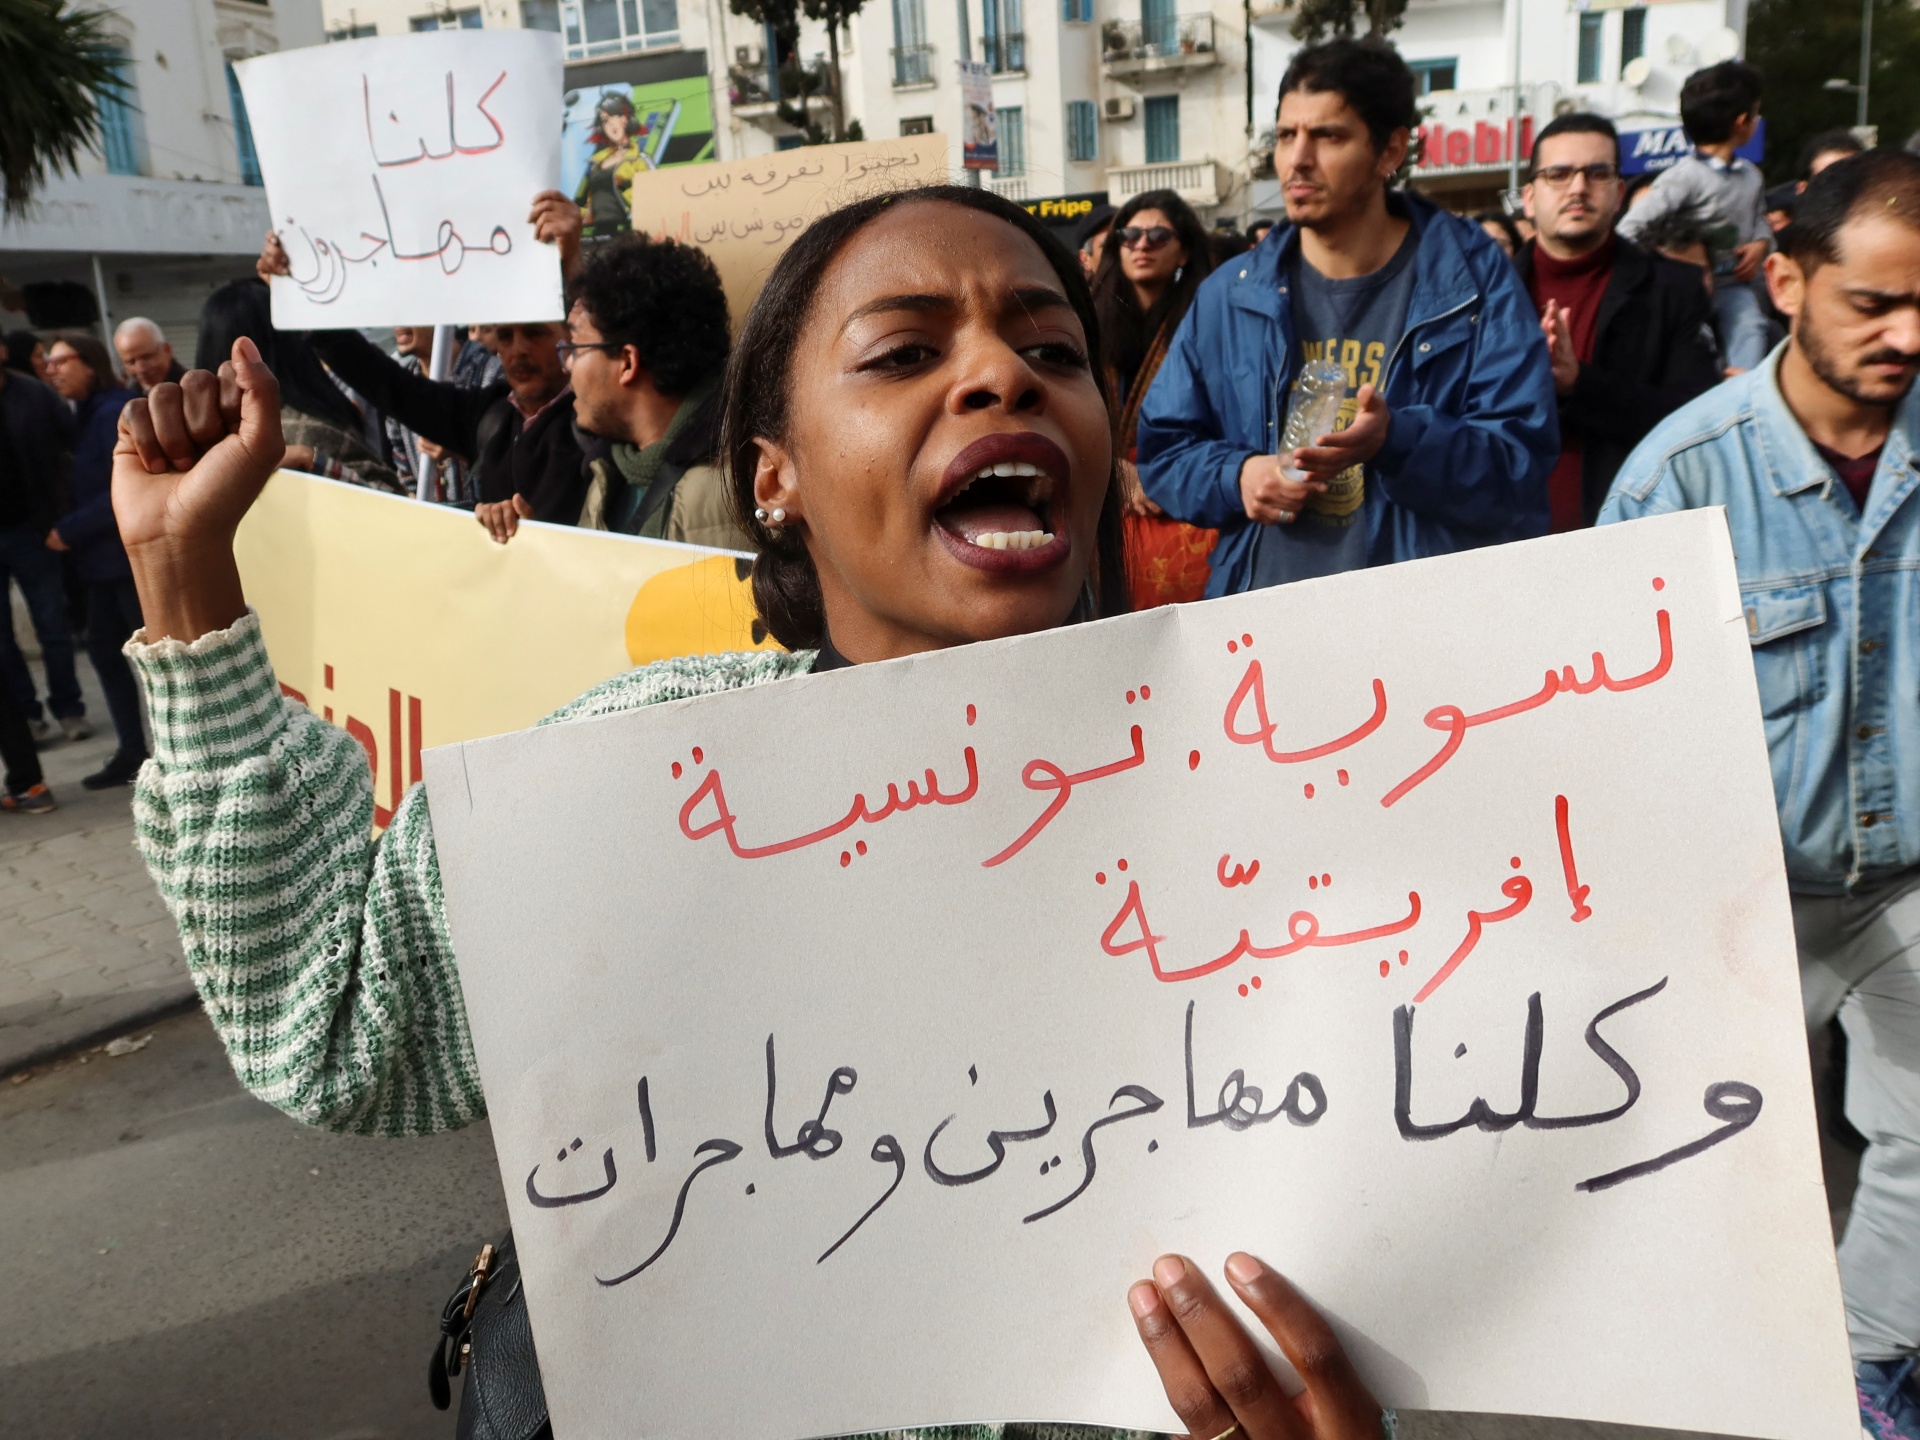 ‘In Tunisia, racists can do whatever they like’